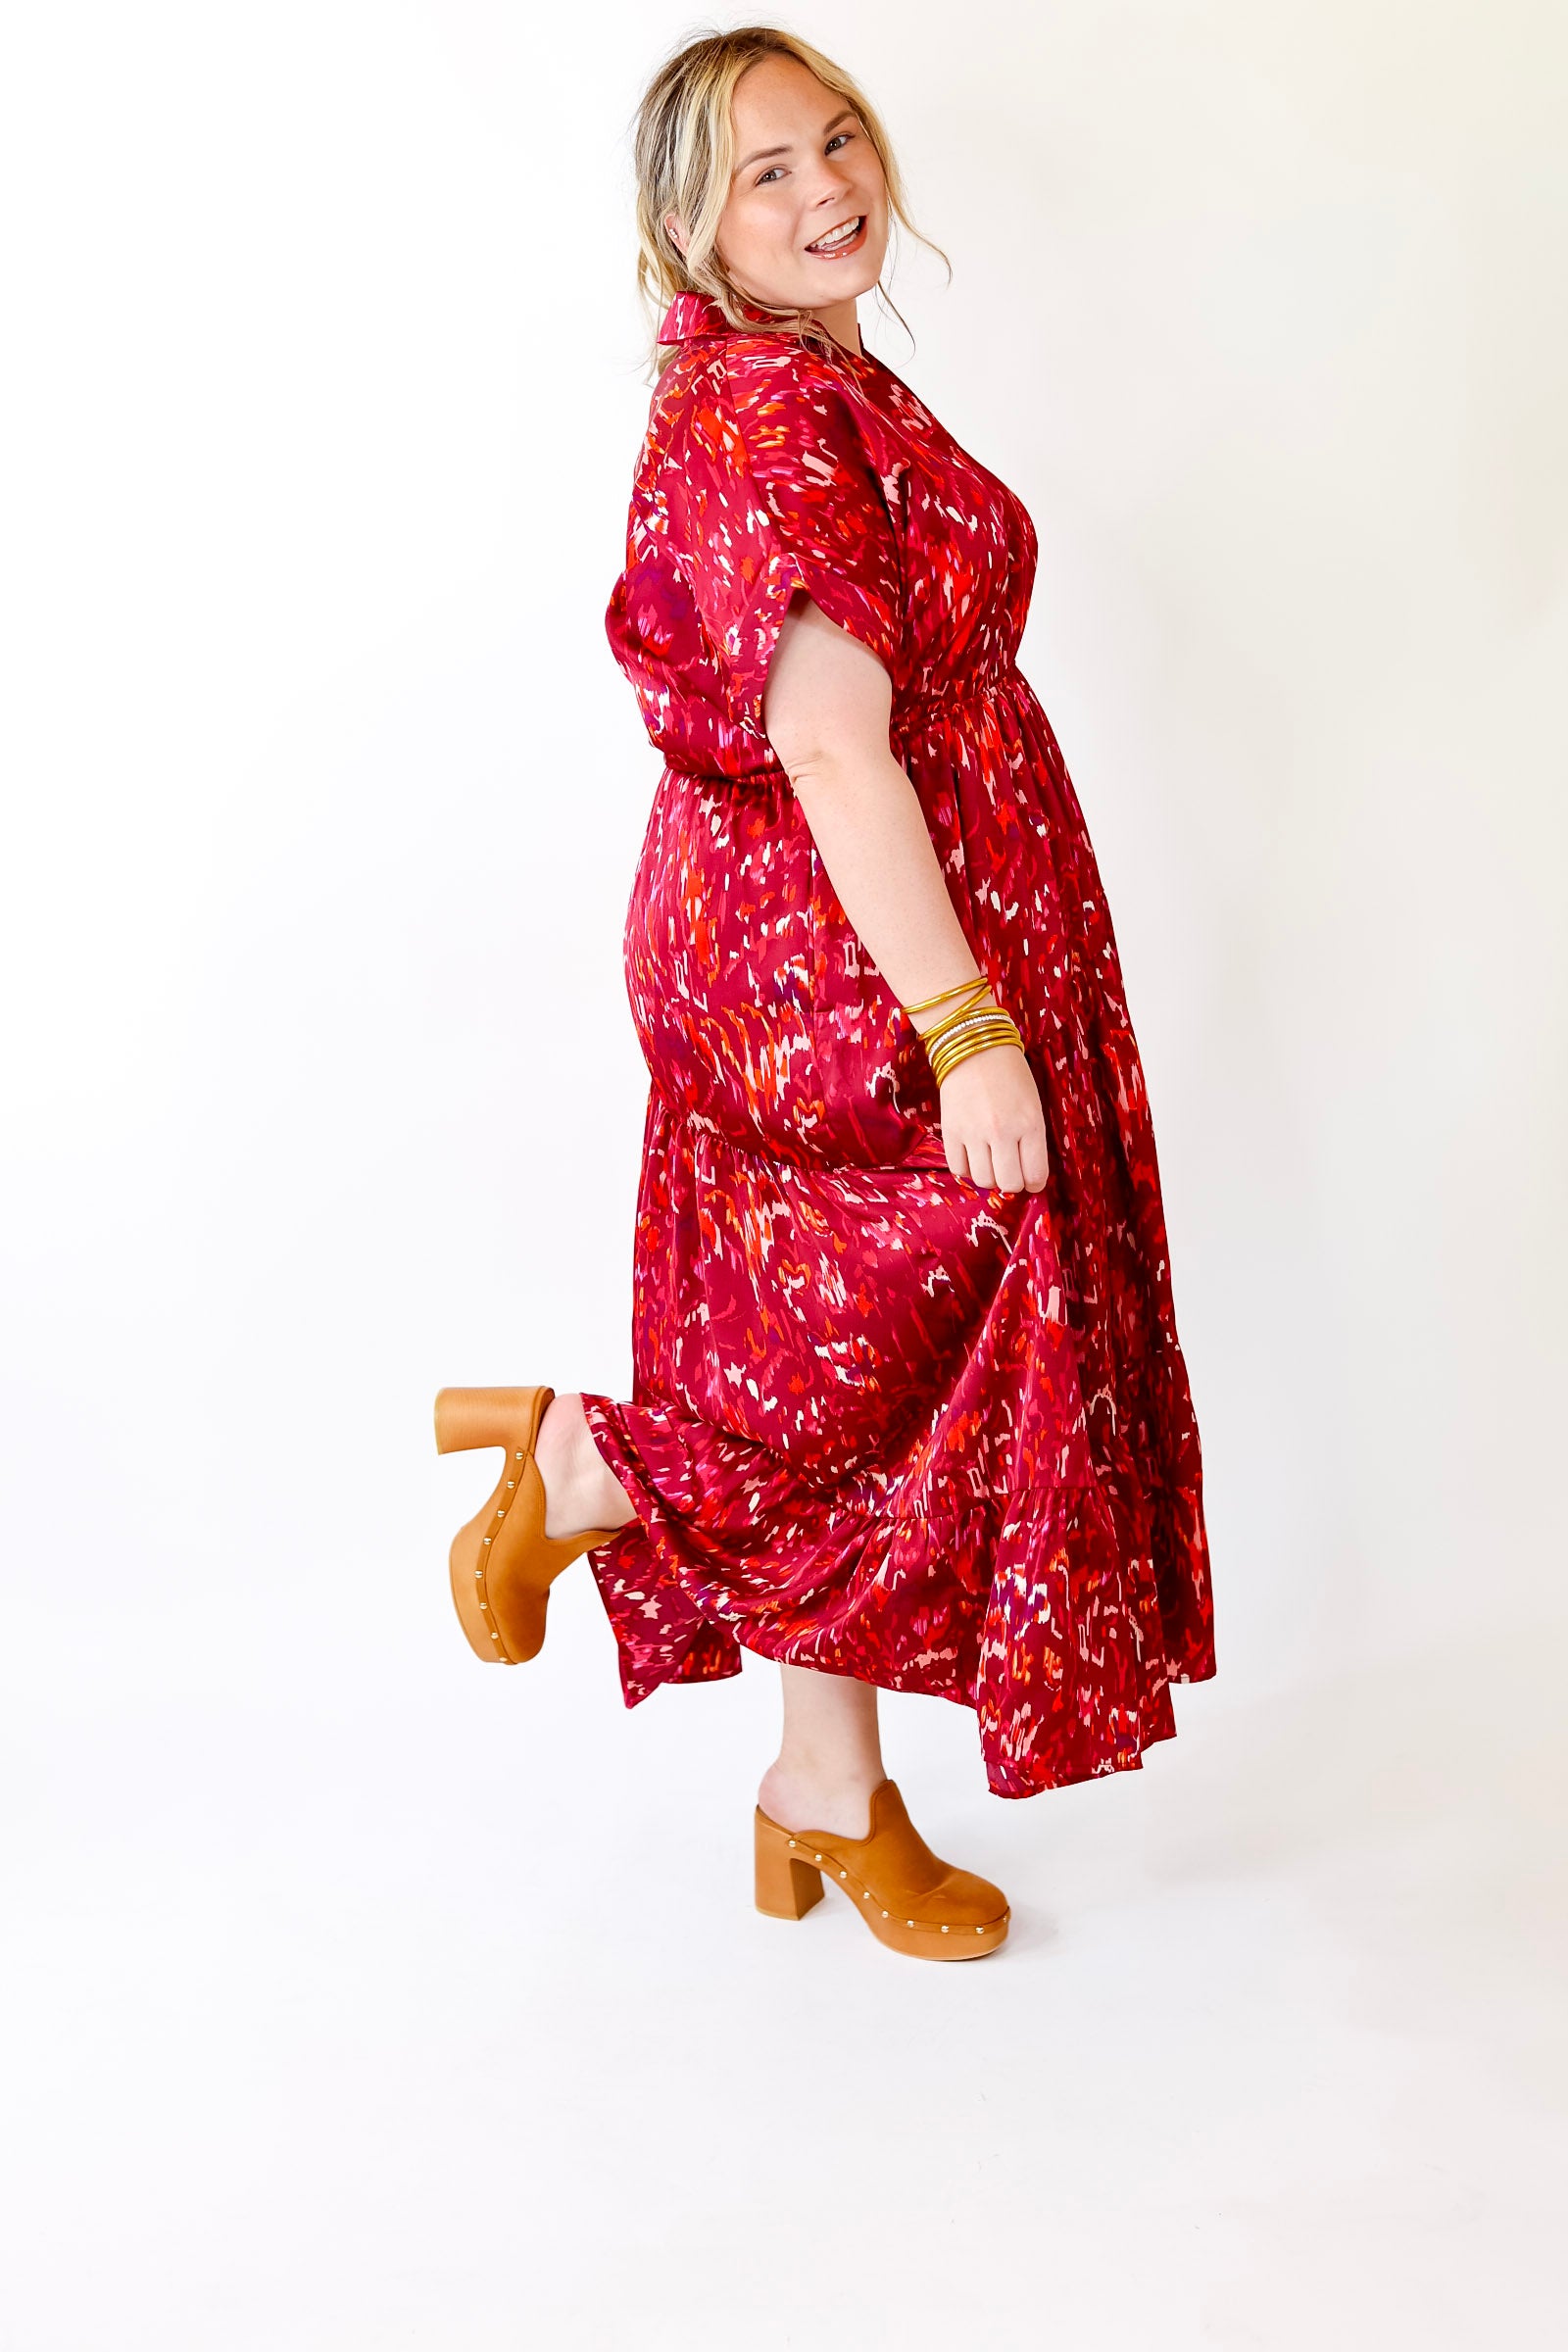 Burnin' Up Multicolor Abstract Midi Dress in Wine Red - Giddy Up Glamour Boutique